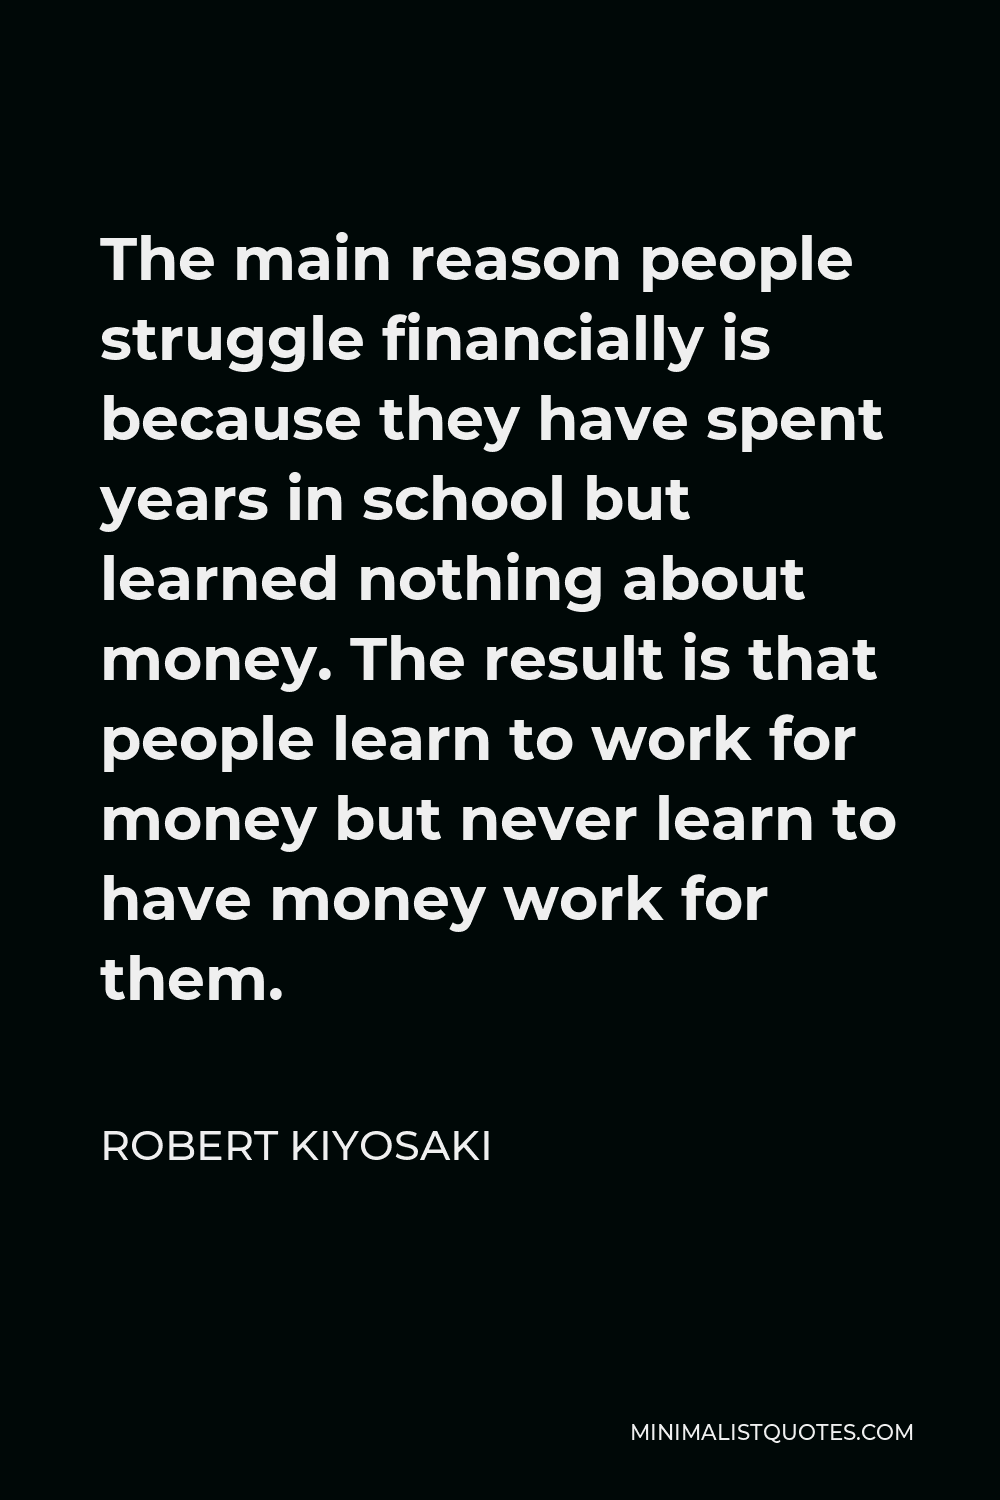 Robert Kiyosaki Quote - The main reason people struggle financially is because they have spent years in school but learned nothing about money. The result is that people learn to work for money but never learn to have money work for them.